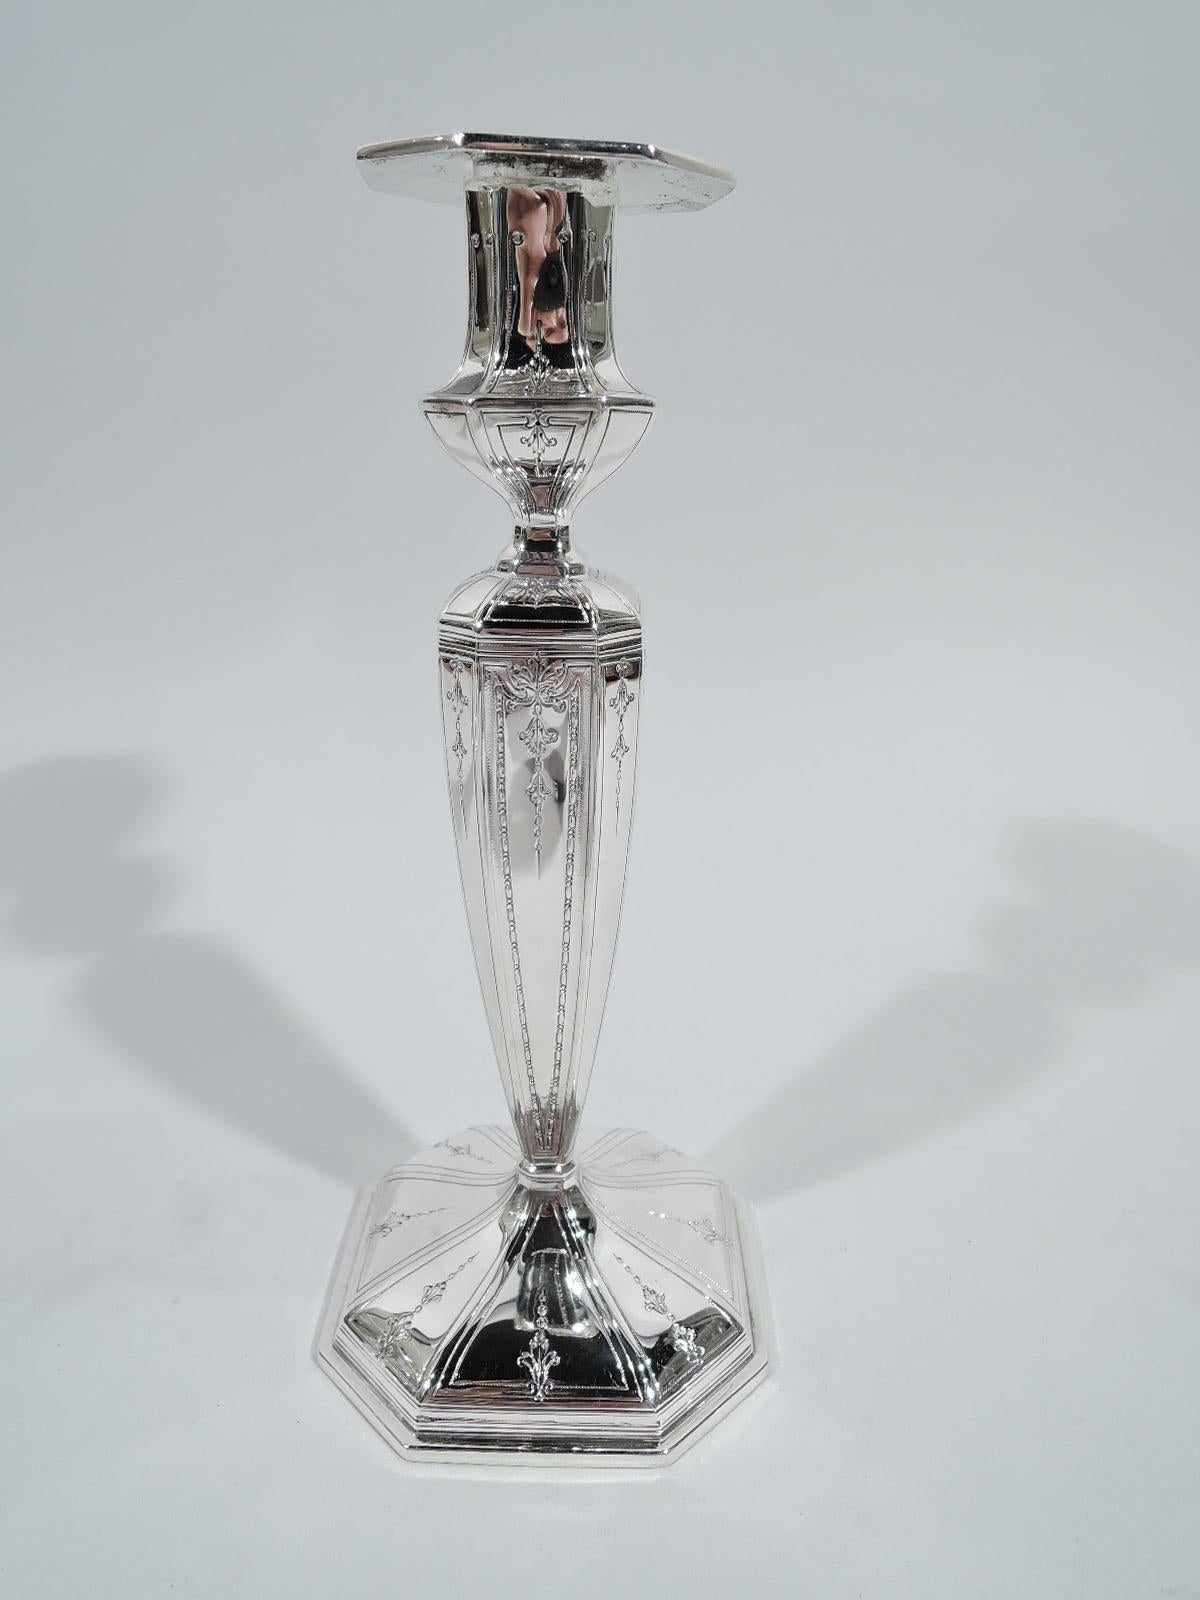 Pair of Edwardian Regency sterling silver candlesticks. Made by Durgin (part of Gorham) in Concord, New Hampshire, circa 1915. Pillar shaft on raised square base. Campana urn socket and detachable square bobeche. Faceting. Engraved leaf and pendant